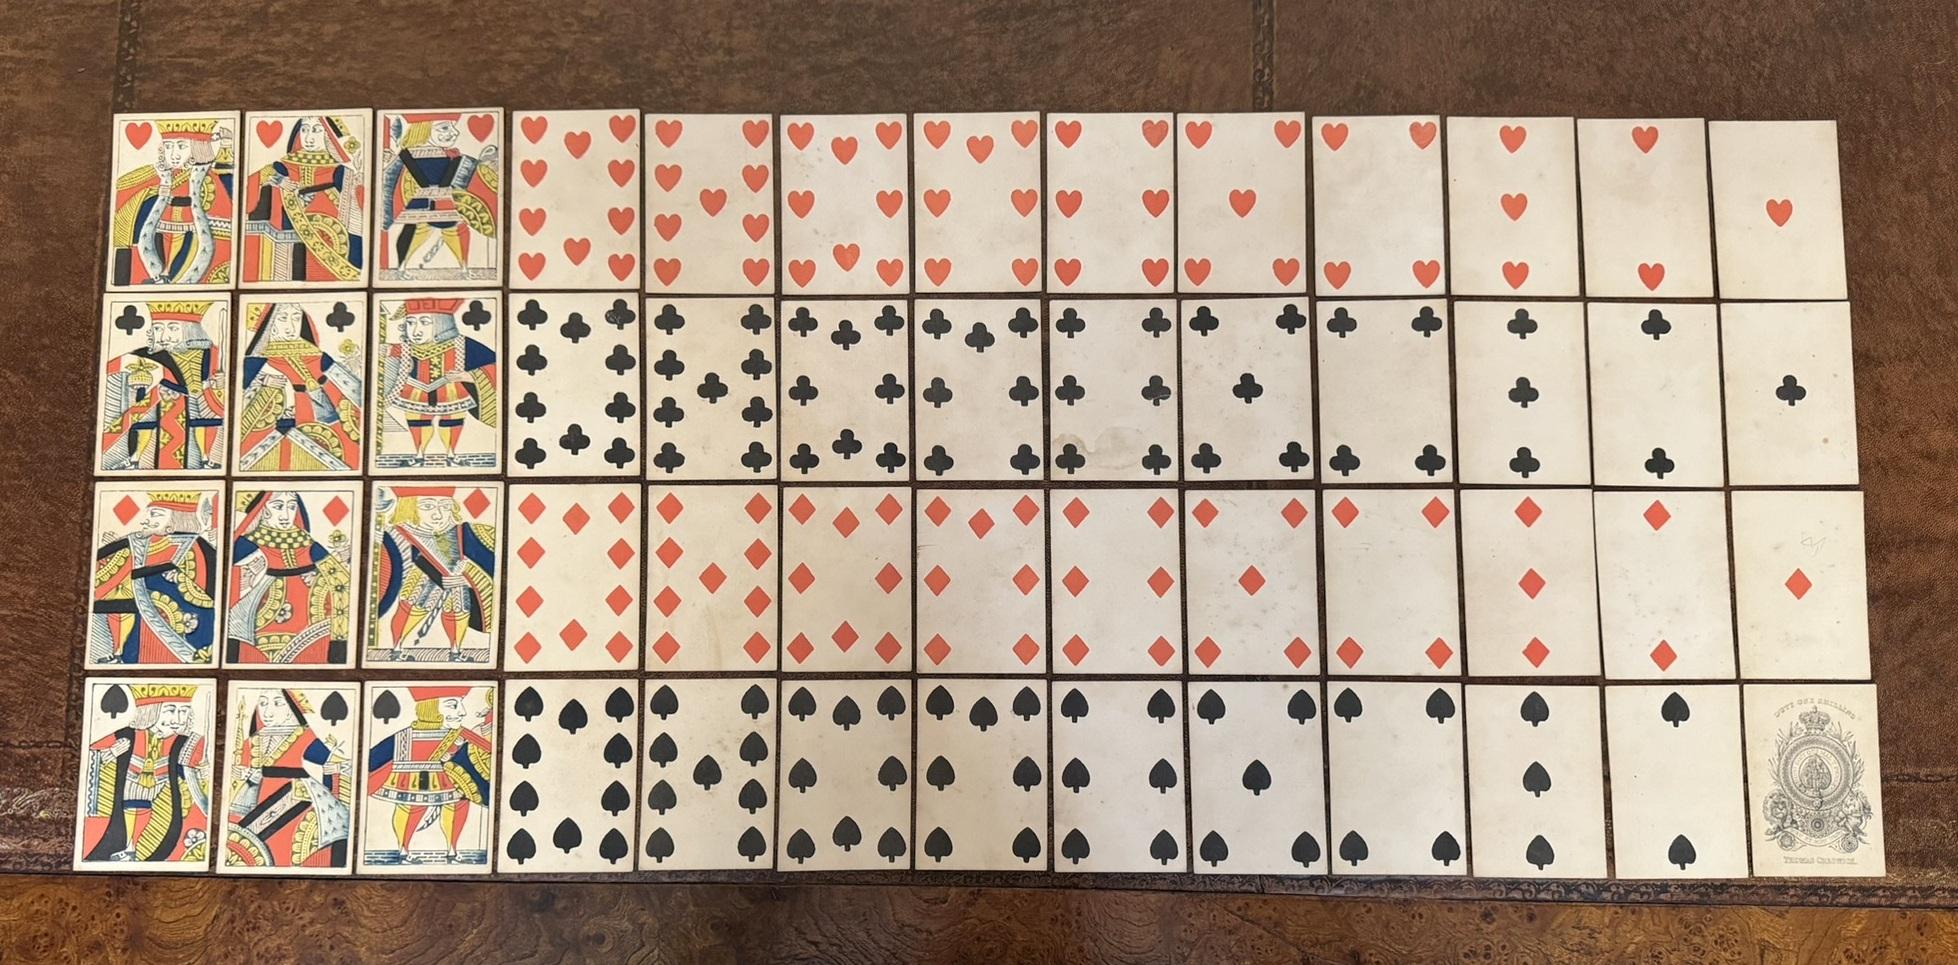 ANTIQUE 1830 THOMAS CRESWICK GEORGIAN PLAYiNG CARDS WITH FIZZLE ACE OF SPADES For Sale 5